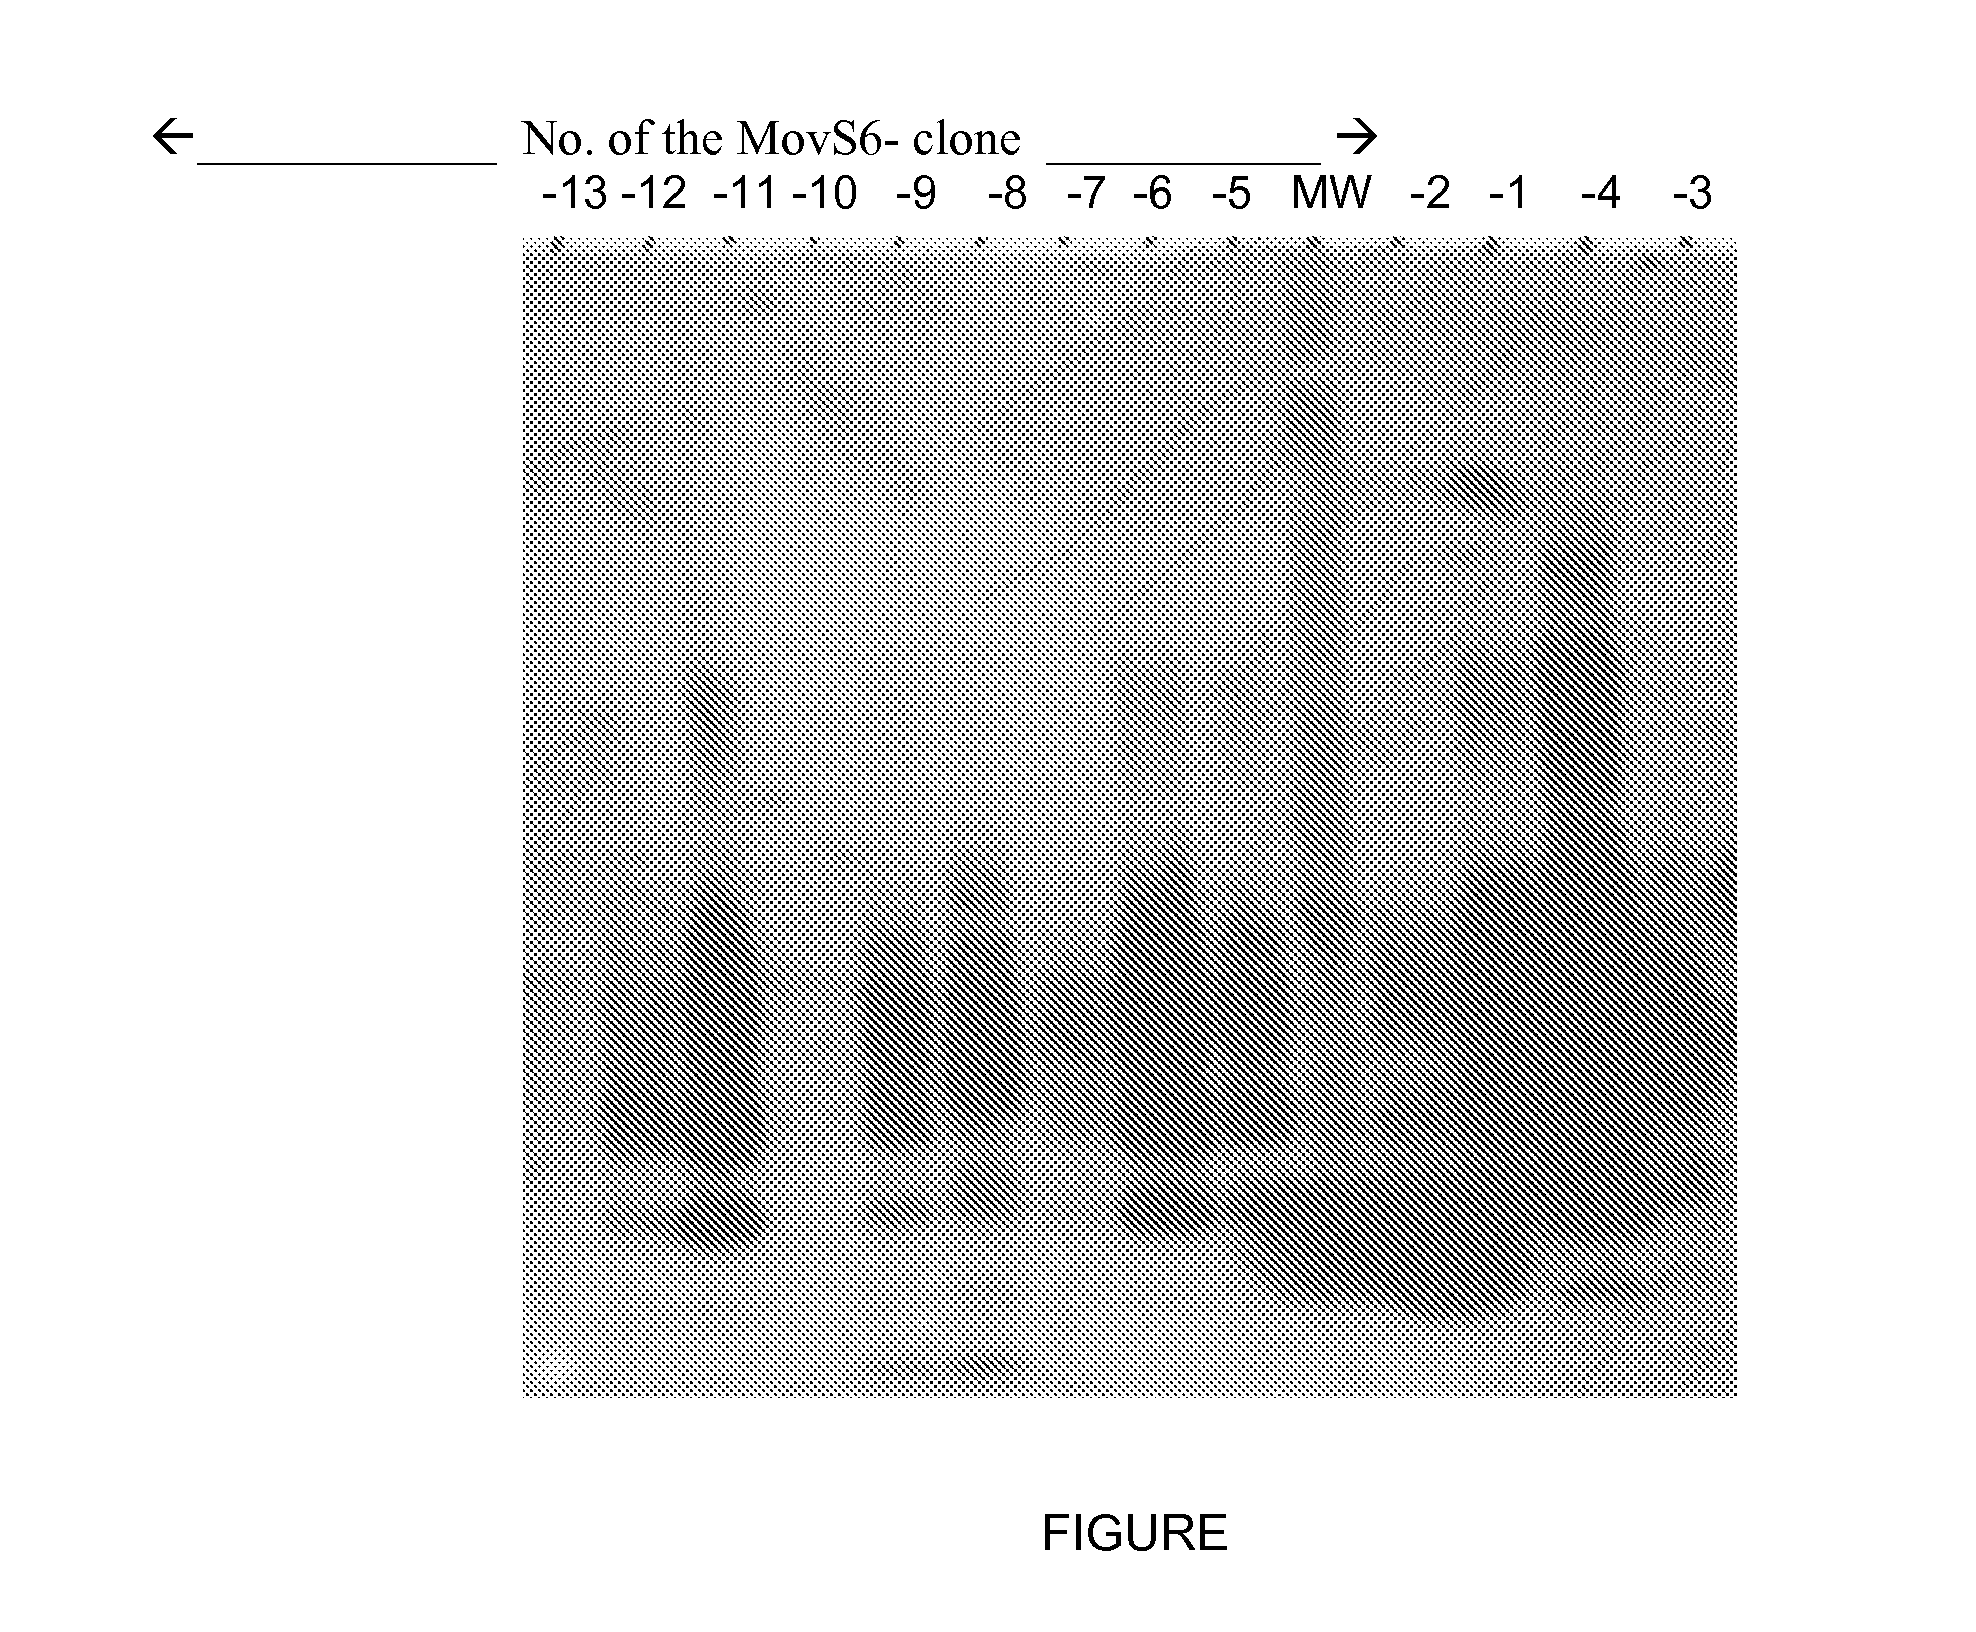 Stable clone cell expressing a prion